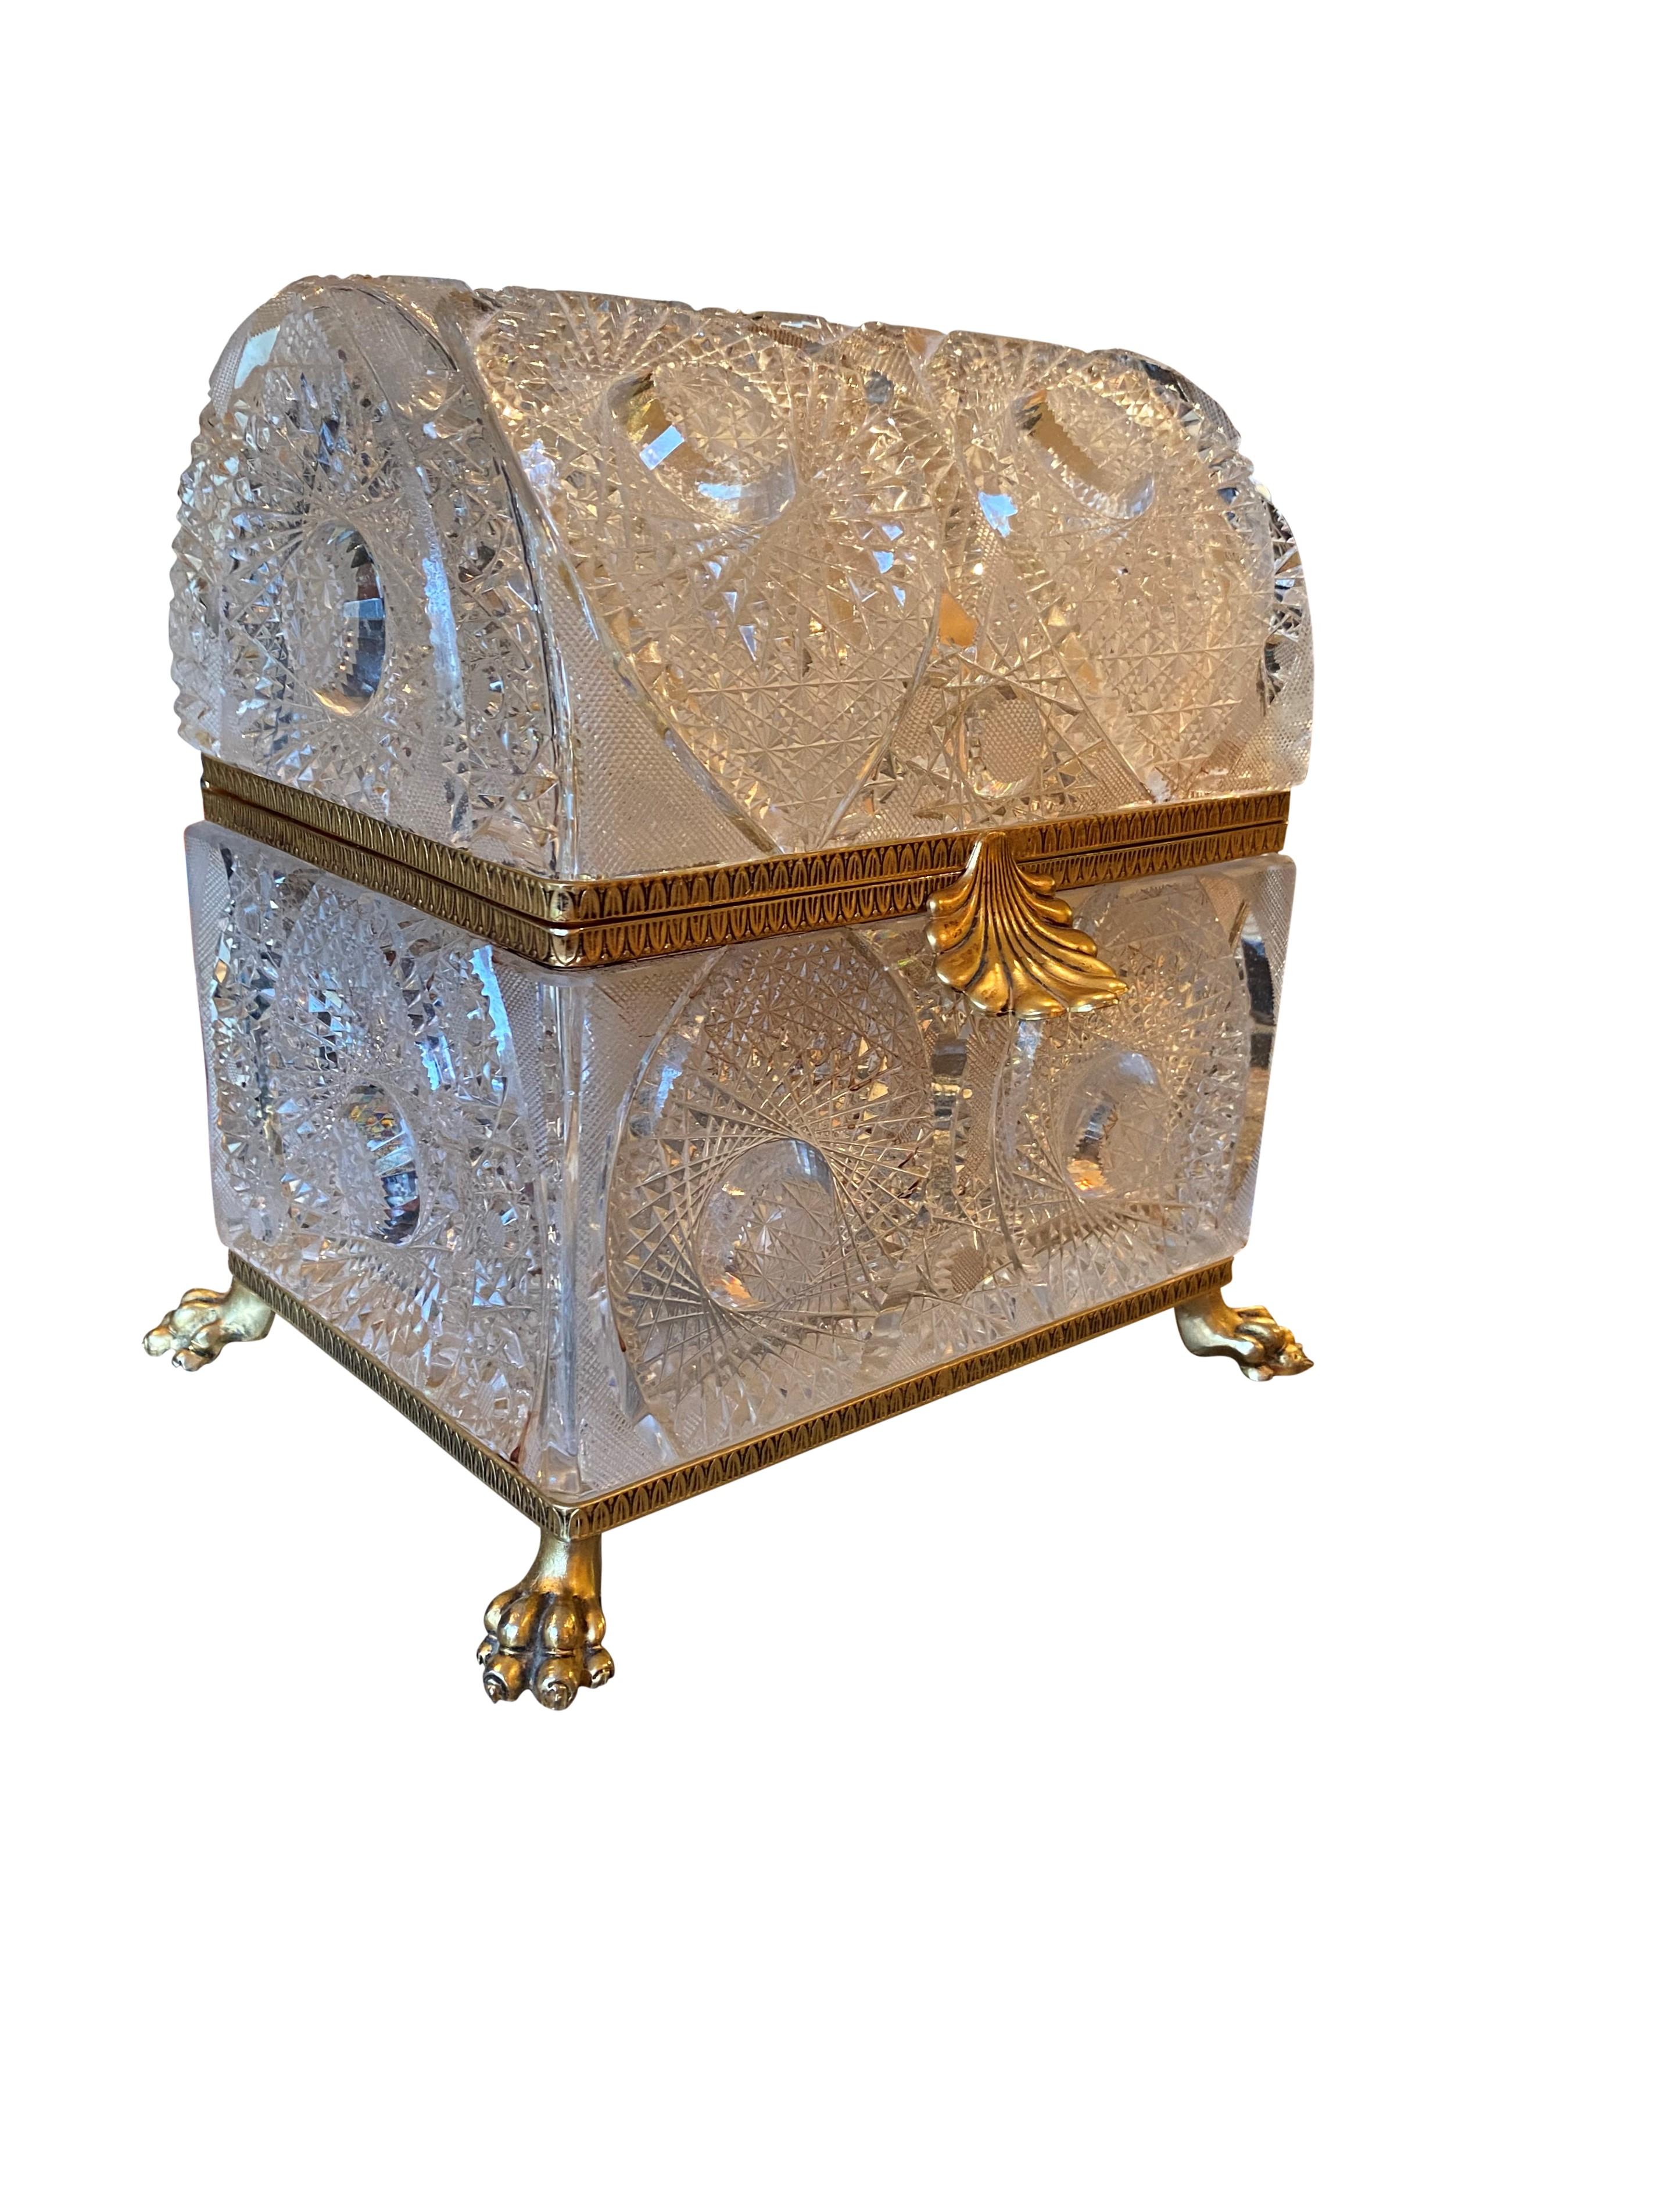 A beautiful domed perfume casket box, French gilt bronze mounted cut glass domed casket crystal frères, entirely hand carved in the Benito workshops in France by Martin Benito. Rectangular shape with domed hinged cover centered by a gilt bronze